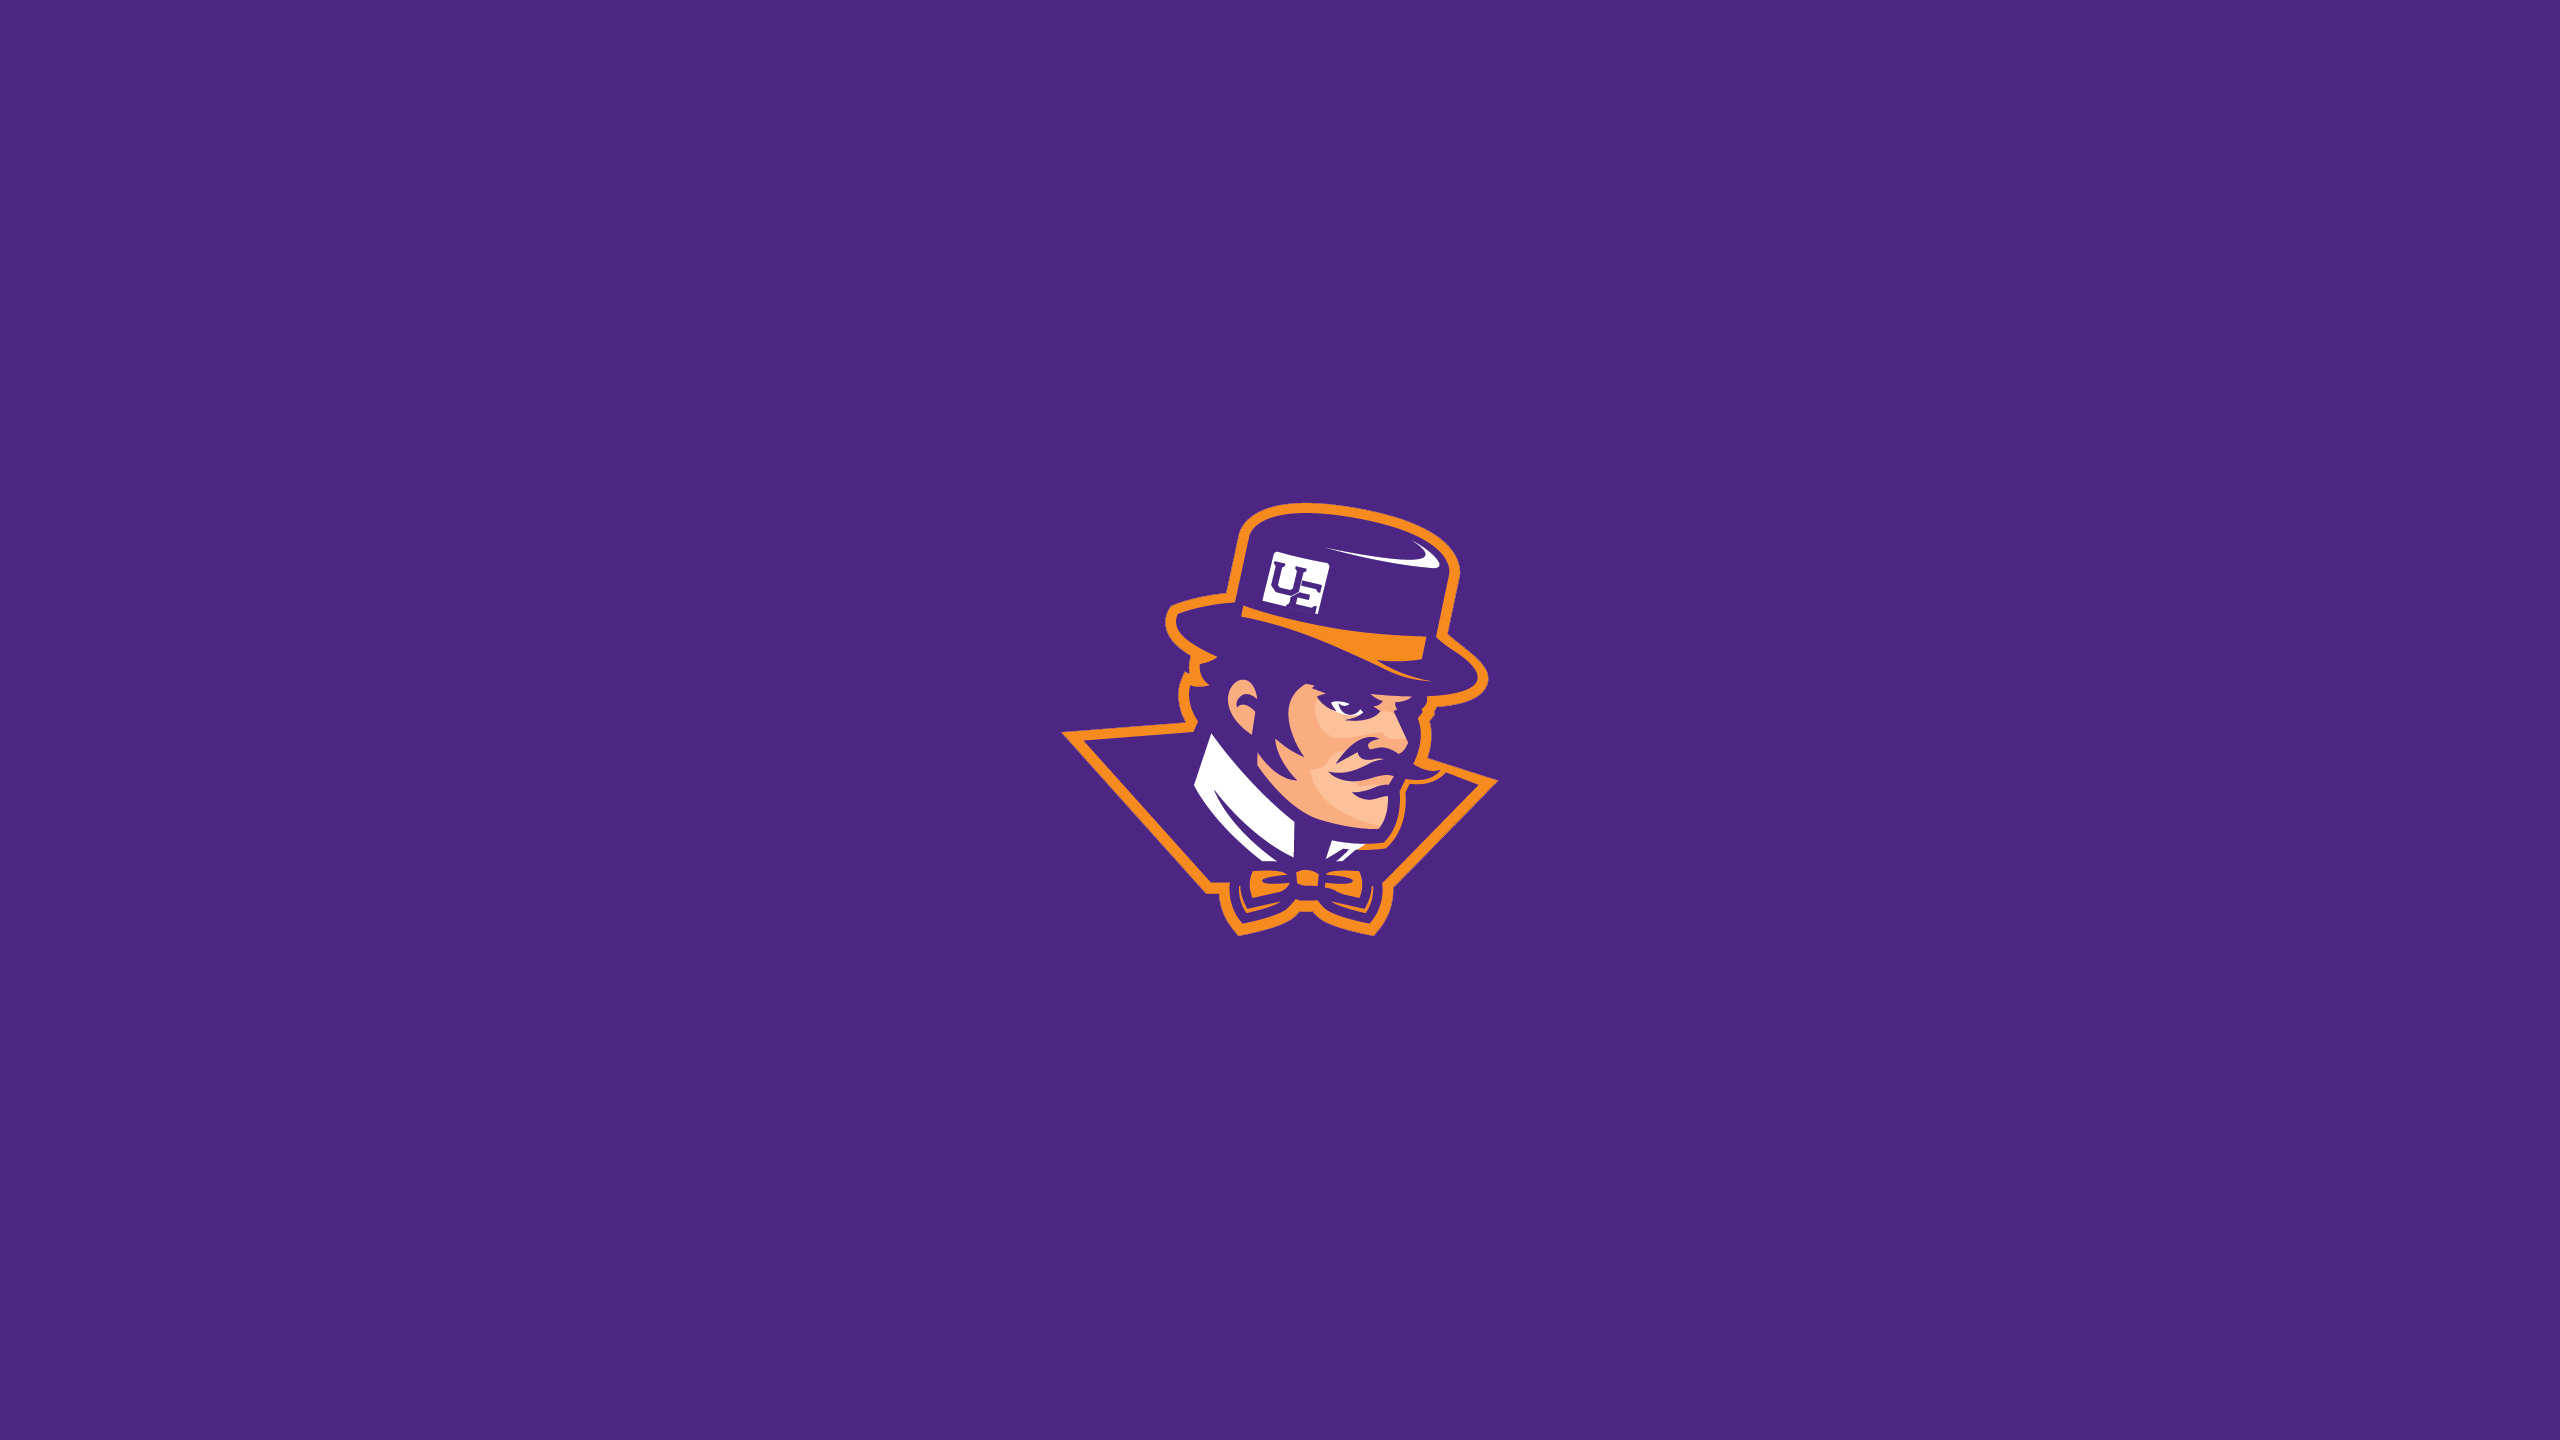 Evansville Purple Aces Basketball - NCAAB - Square Bettor